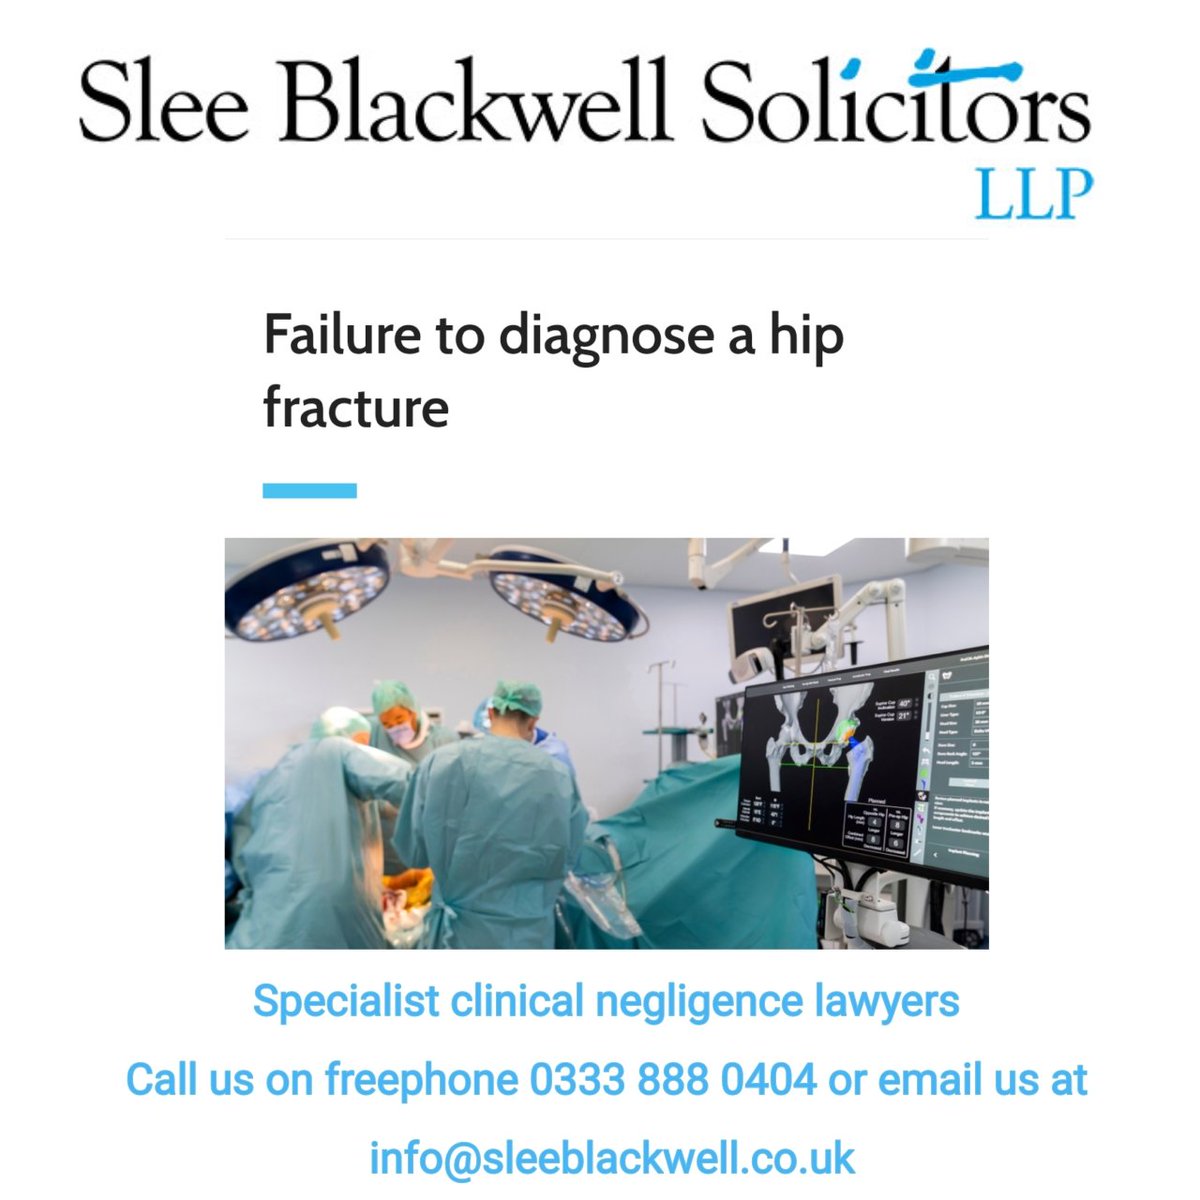 @CarolineWebberB recently negotiated a settlement for her client following a failure to diagnose a hip fracture for 8 weeks.

If you've suffered due to delayed diagnosis why not contact us for a free case assessment.

sleeblackwell.co.uk/legal-articles…

#negligence
#claim
#hipfracture